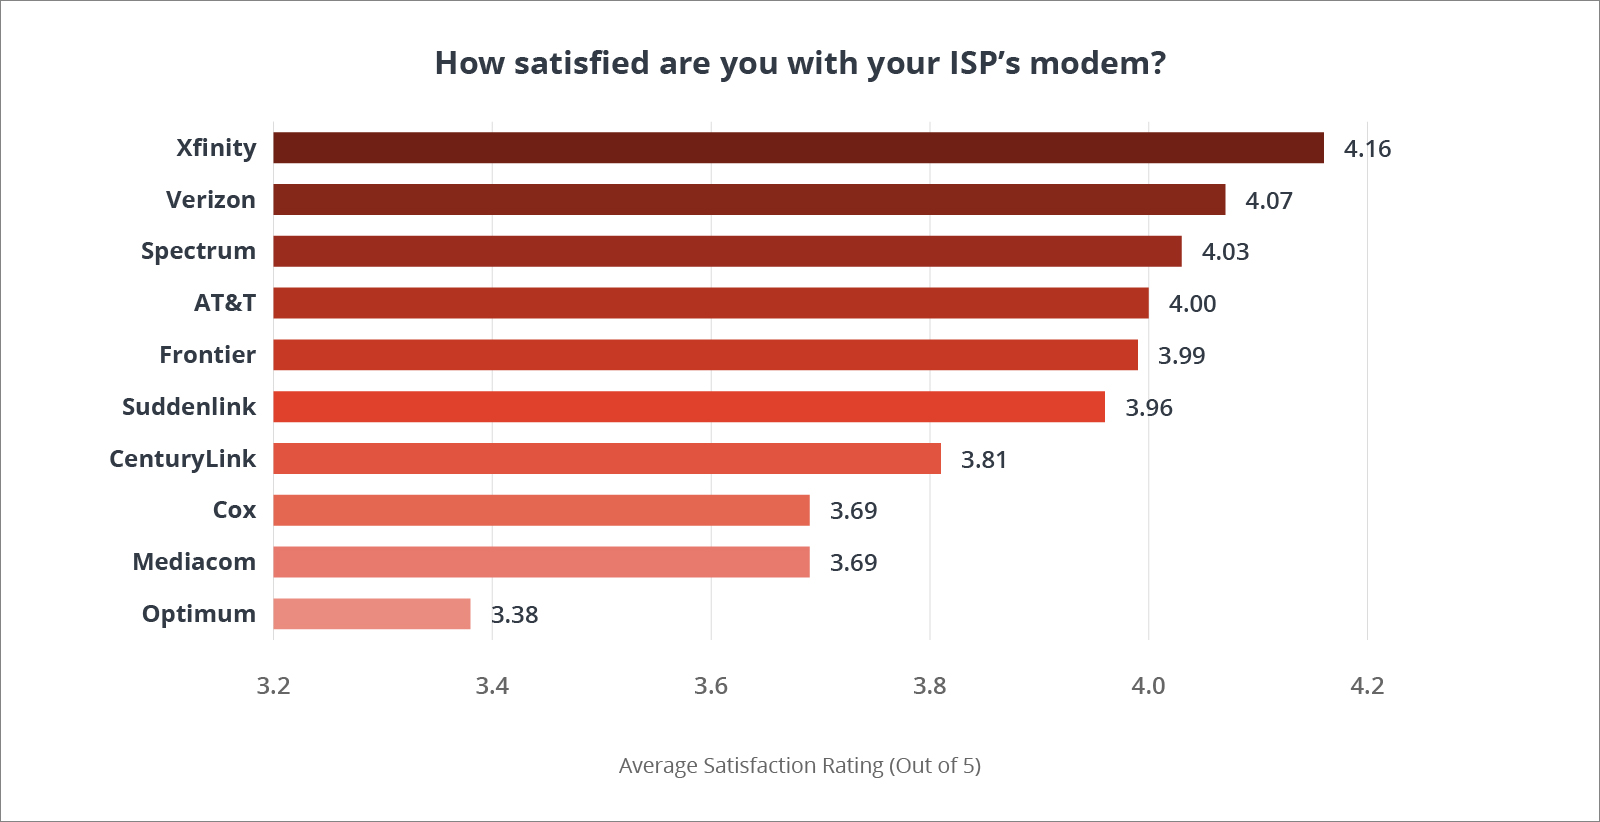 Chart ranking providers based on question, "How satisfied are you with your ISP's modem?"